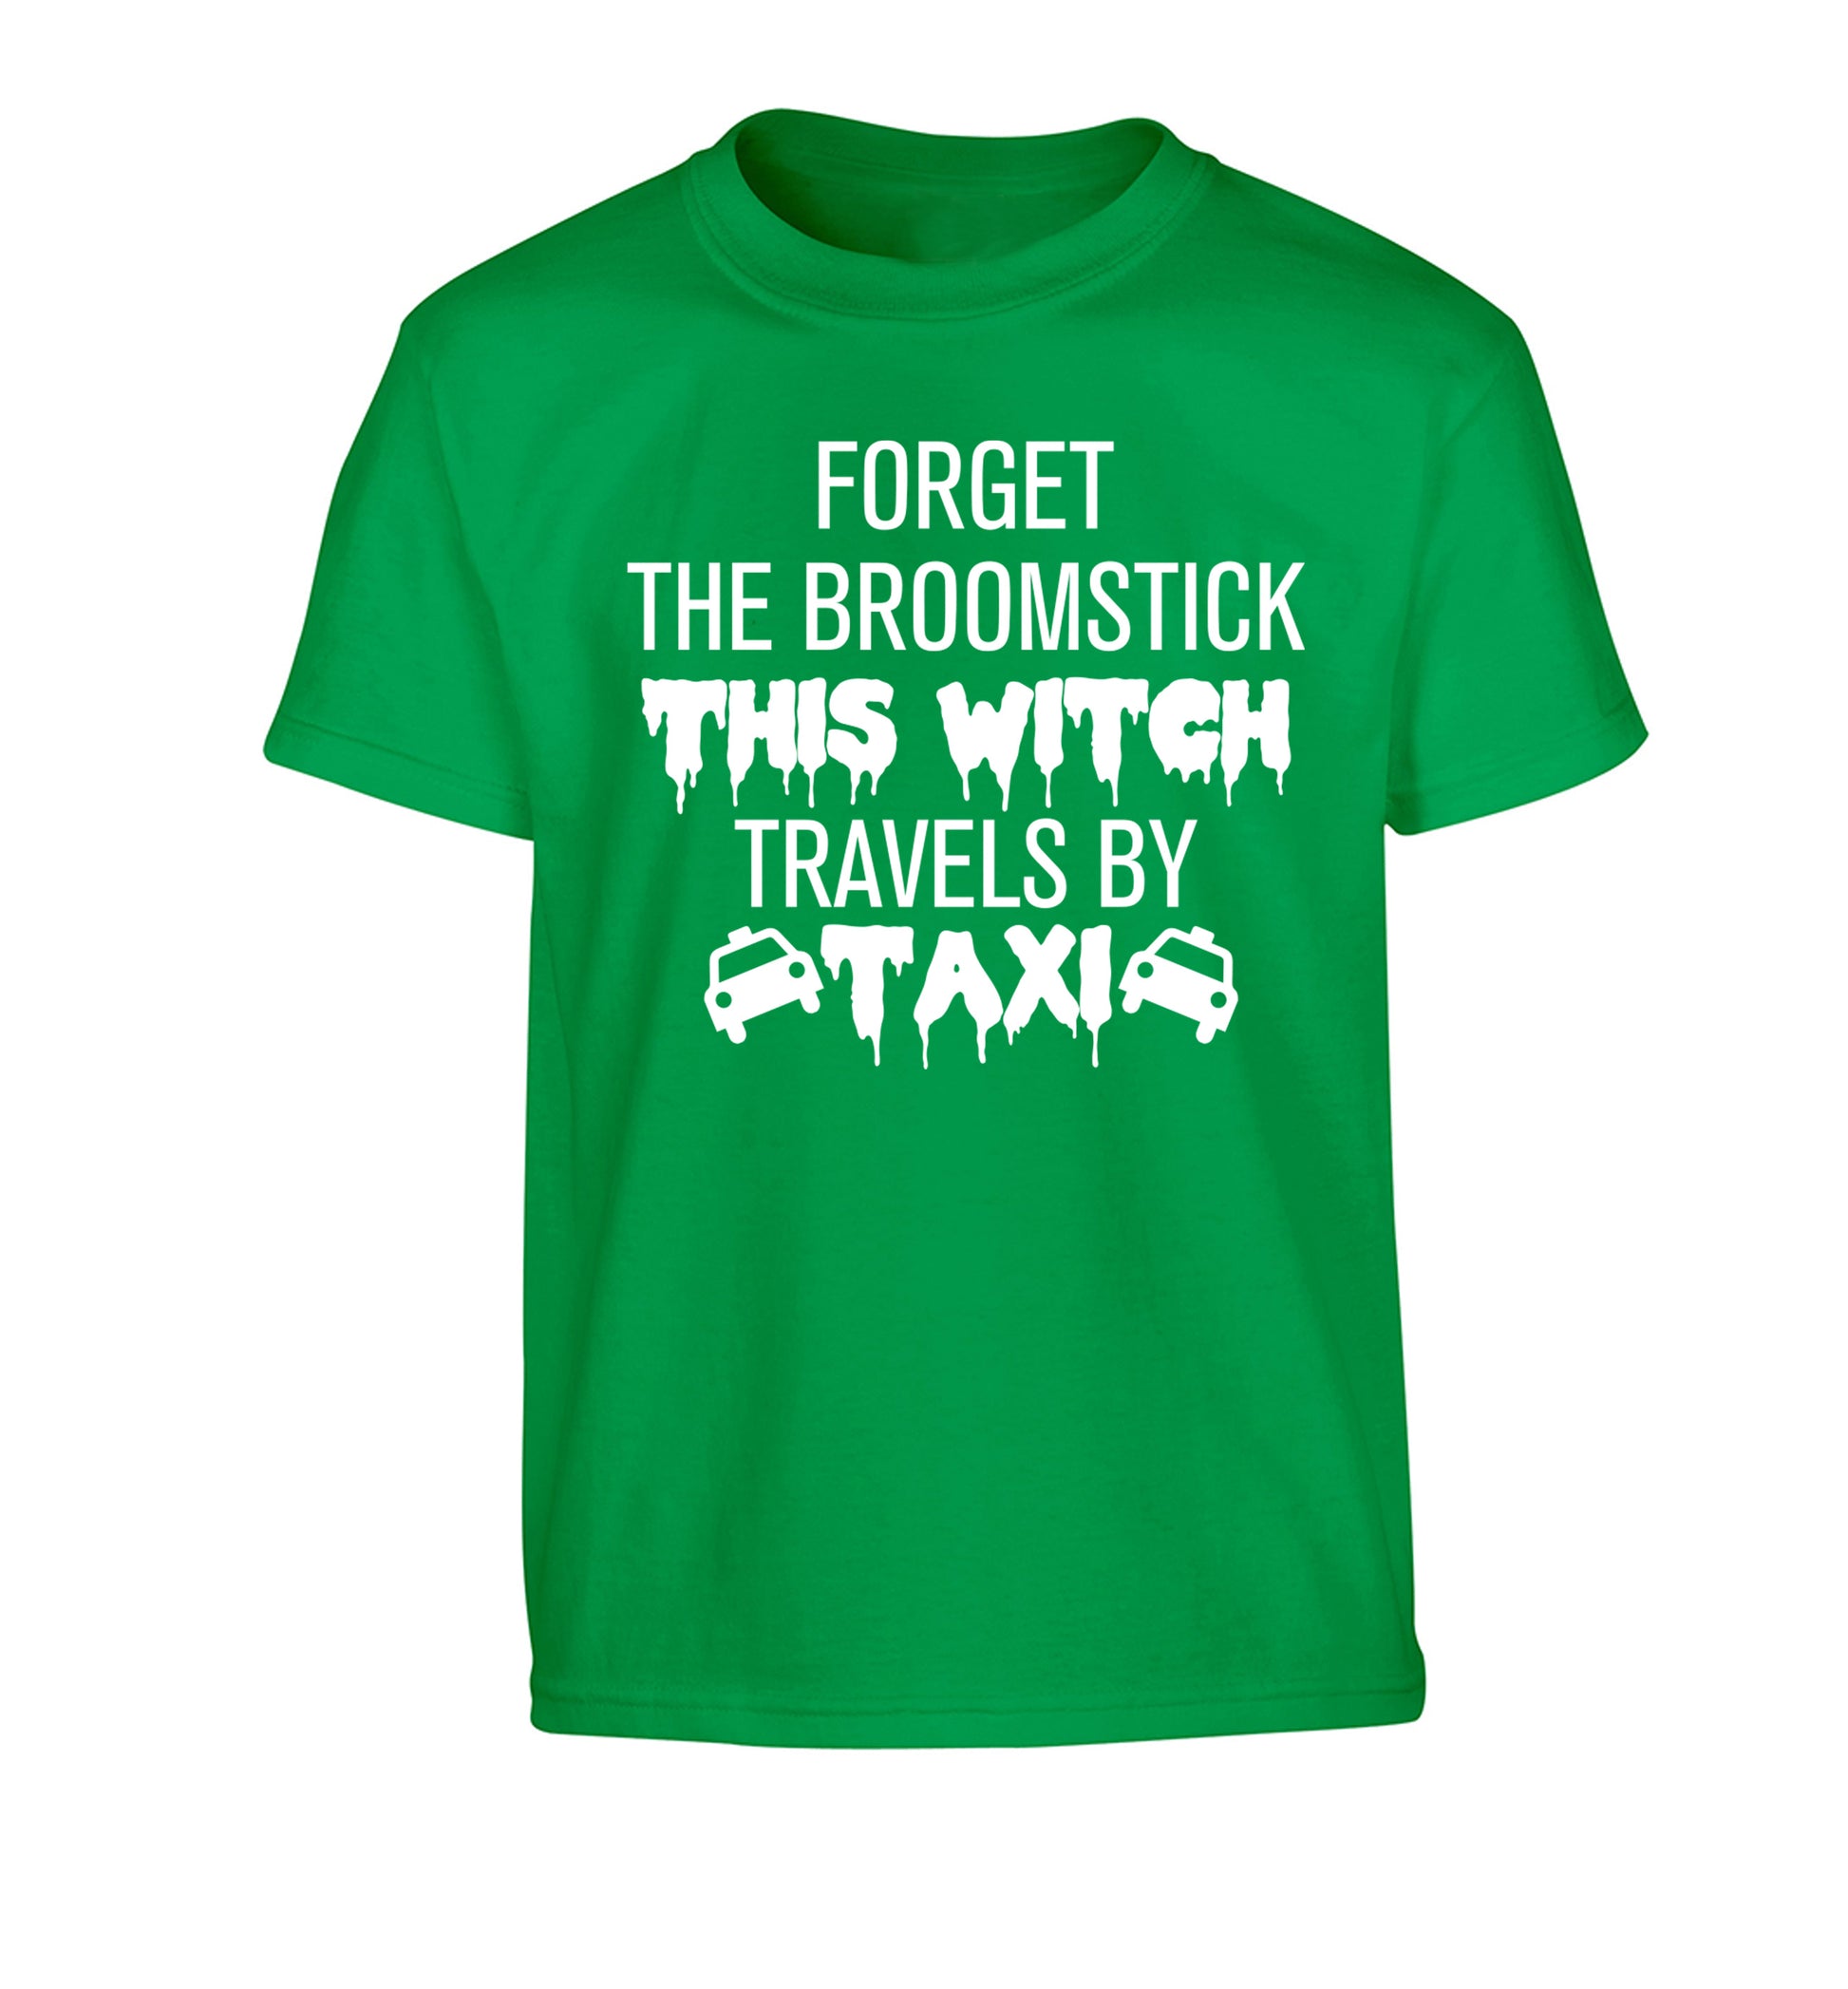 Forget the broomstick this witch travels by taxi Children's green Tshirt 12-14 Years